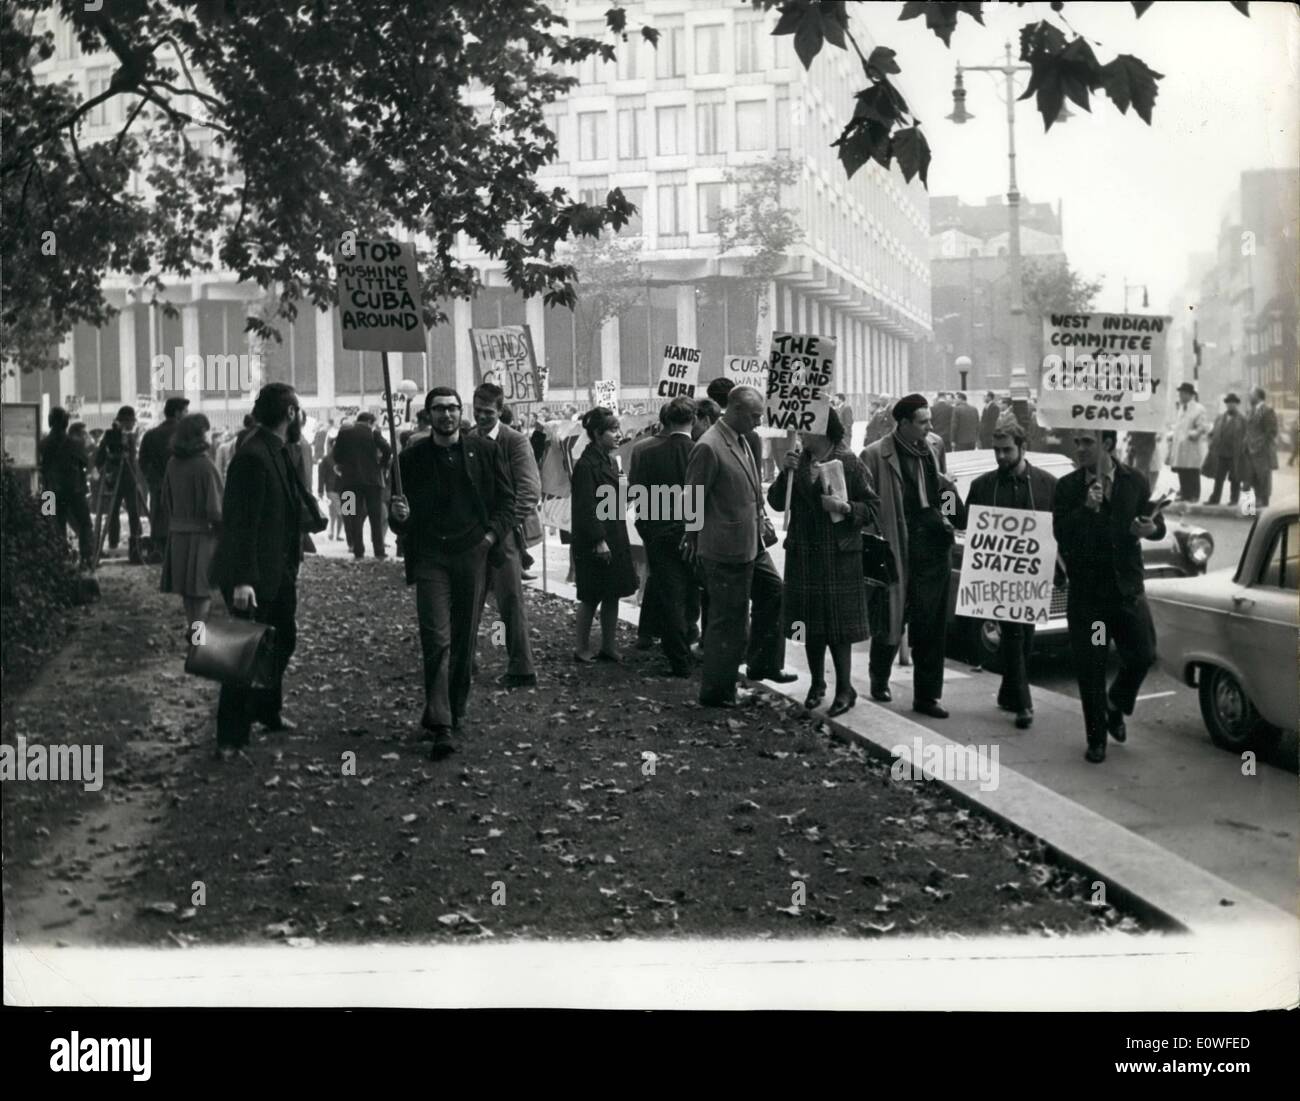 Oct. 24, 1962 - 24-10-62 U.S. Embassy battle: 124 arrested. A total of 124 ban-the-bomb demonstrators were arrested last night after 2,000 people had battled with police outside the American Embassy in Grosvenor Square, London. Guards were issued with extra ammunition after a crowd shouting Hands off Cuba besieged the building. They charged the Embassy, but 600 police broke up the demonstration. Picture Shows: Demonstrators begin to gather at the U.S. Embassy, carrying placards. Stock Photo